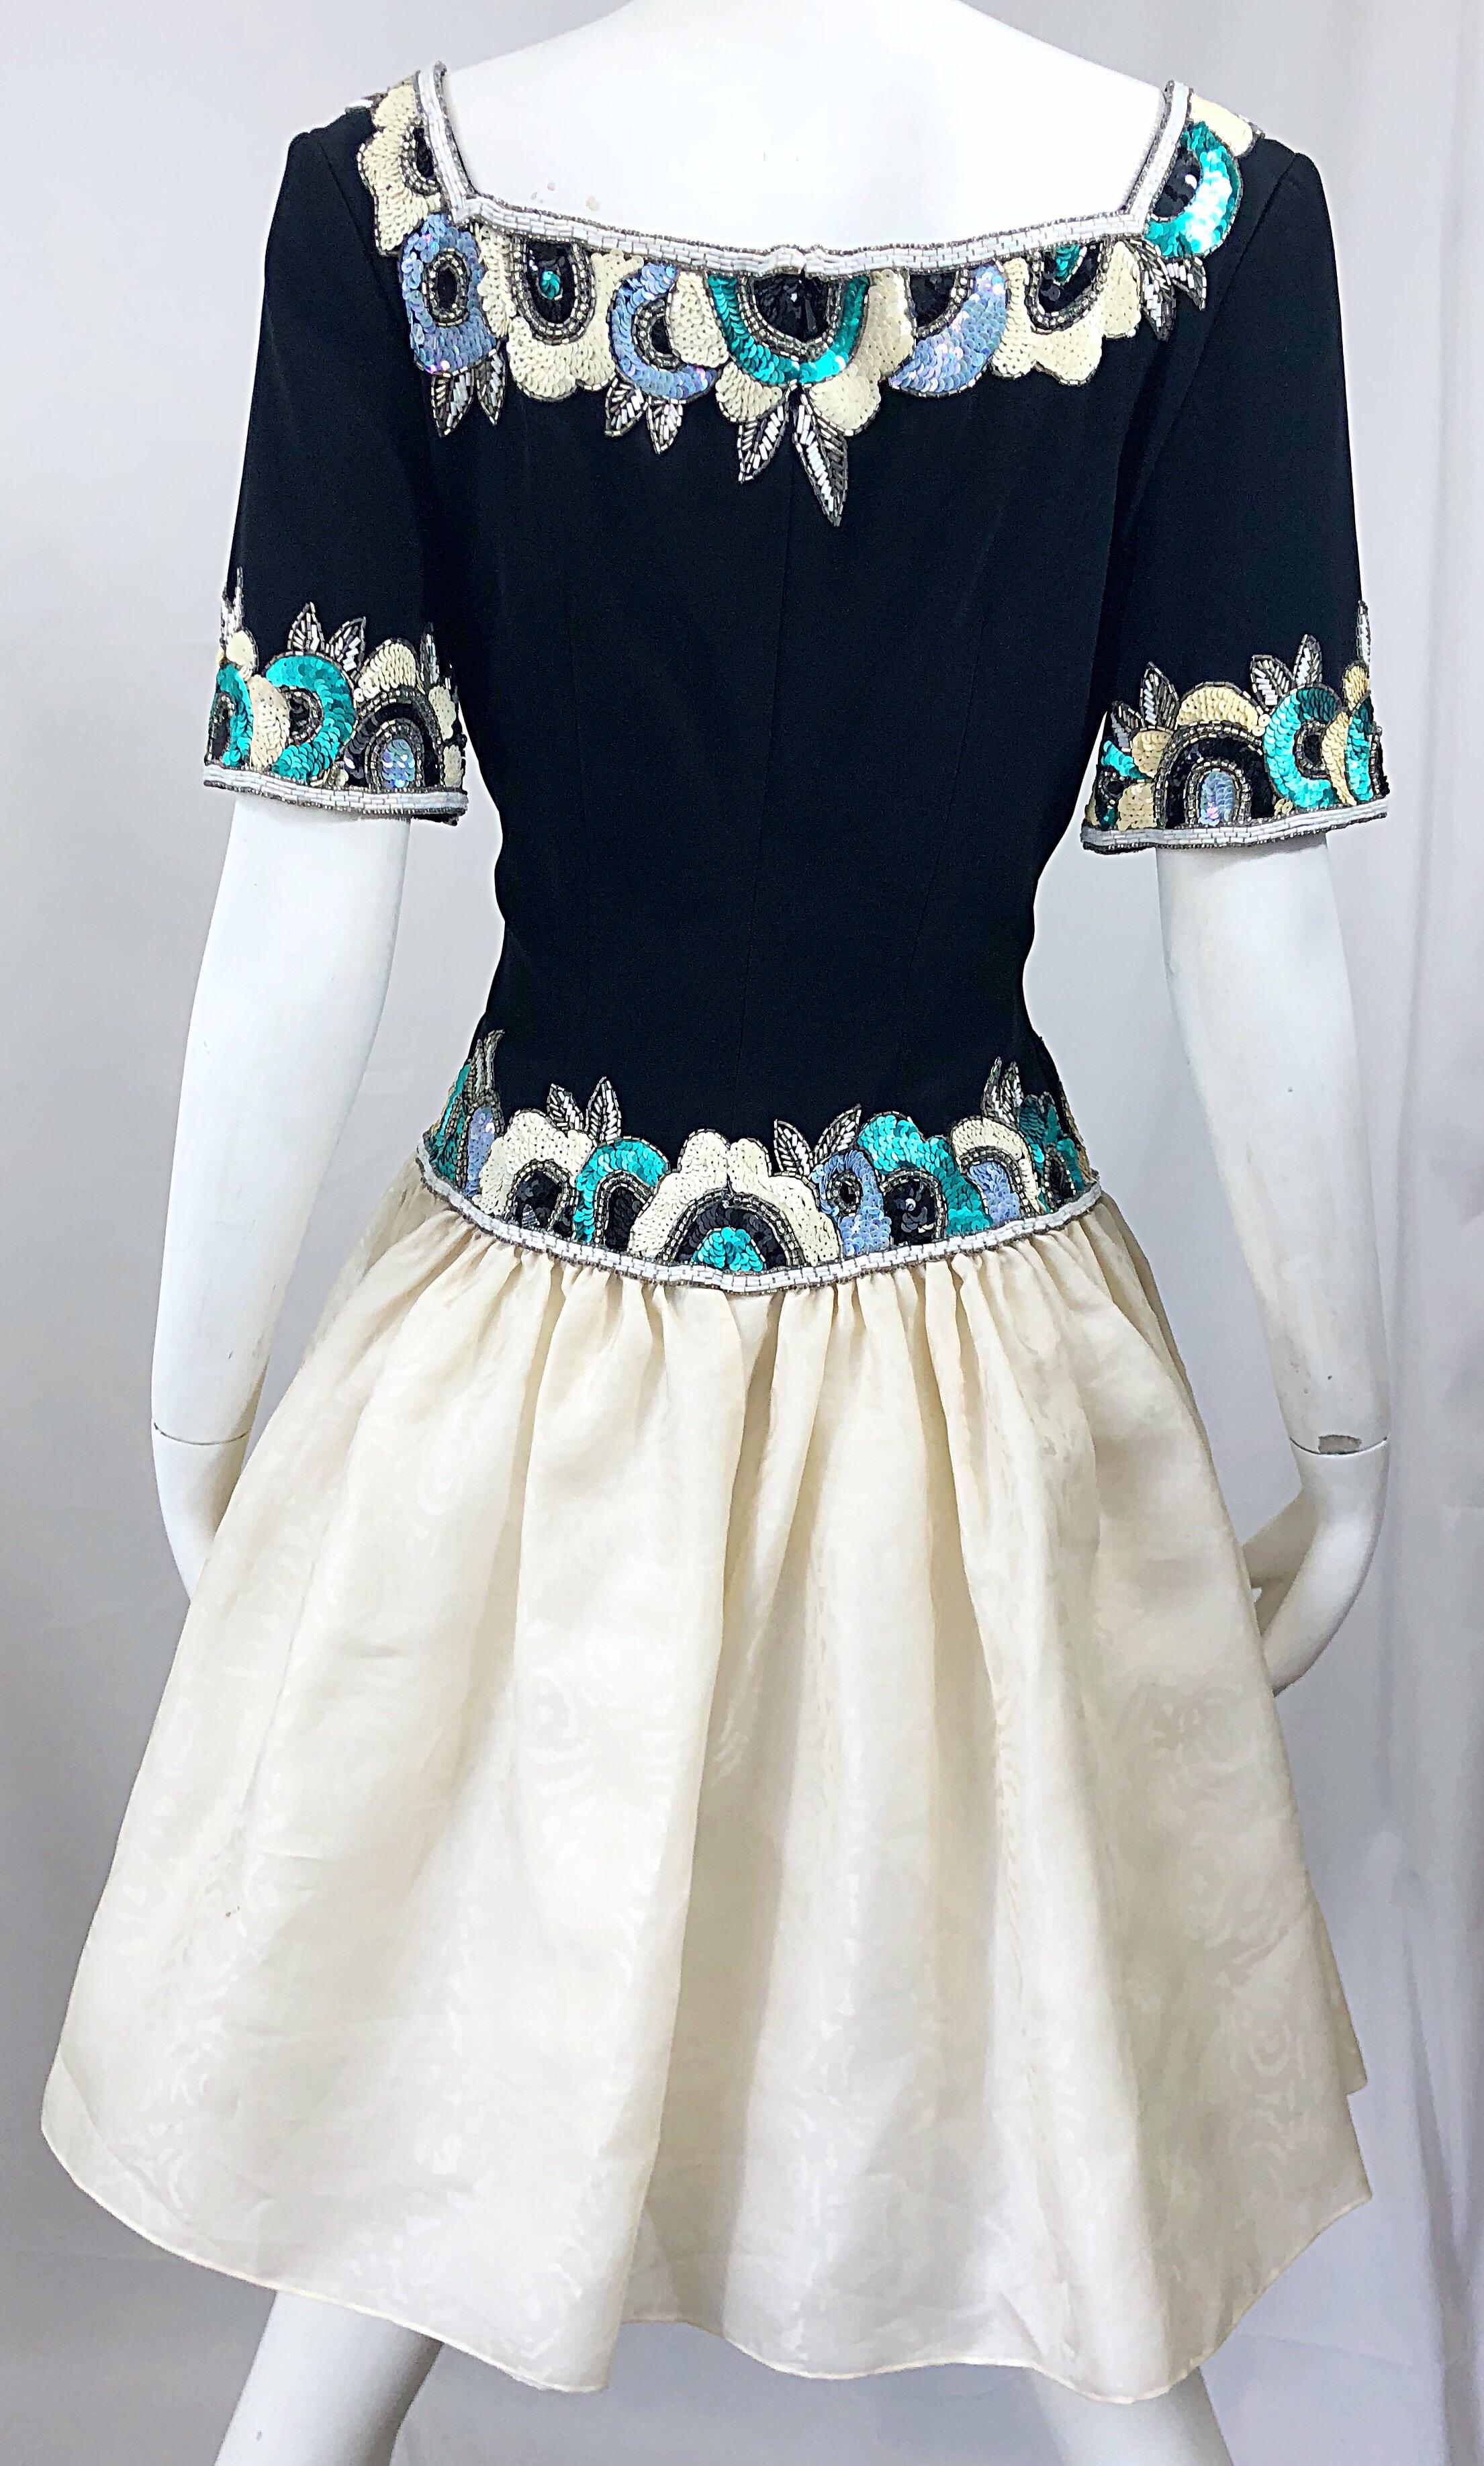 Vintage Bob Mackie 1990s Size 6 Black, White and Blue Silk Fit n' Flare Dress For Sale 6